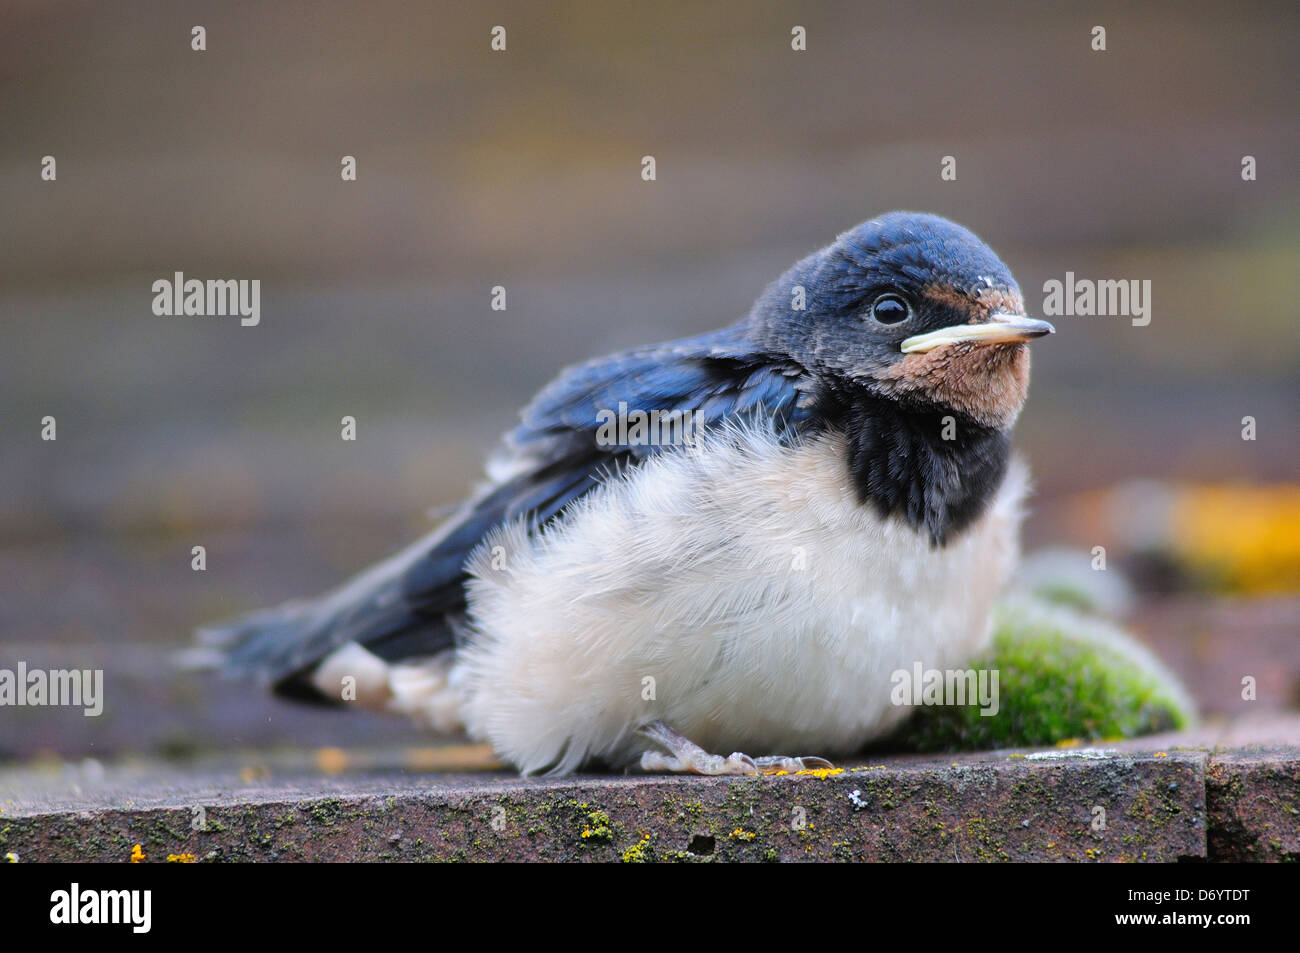 A swallow fledgling at rest Stock Photo